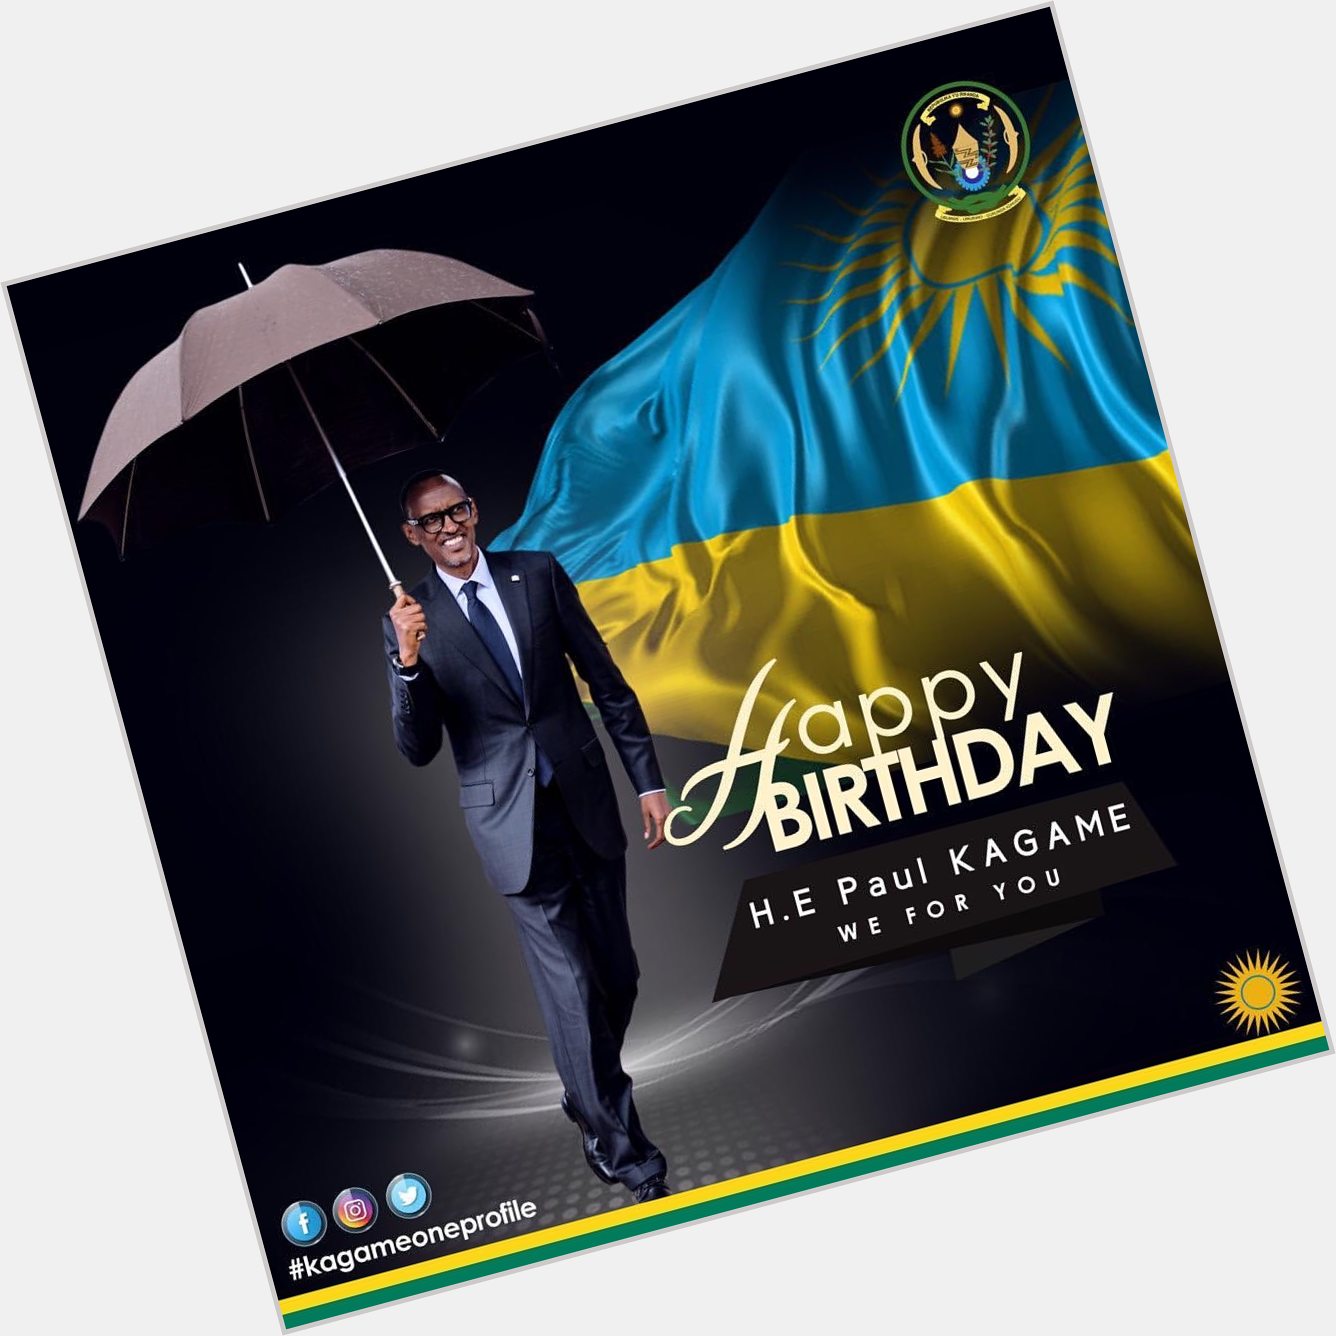 Happy birthday to our father 
A man of vision more years Mr Paul kagame 